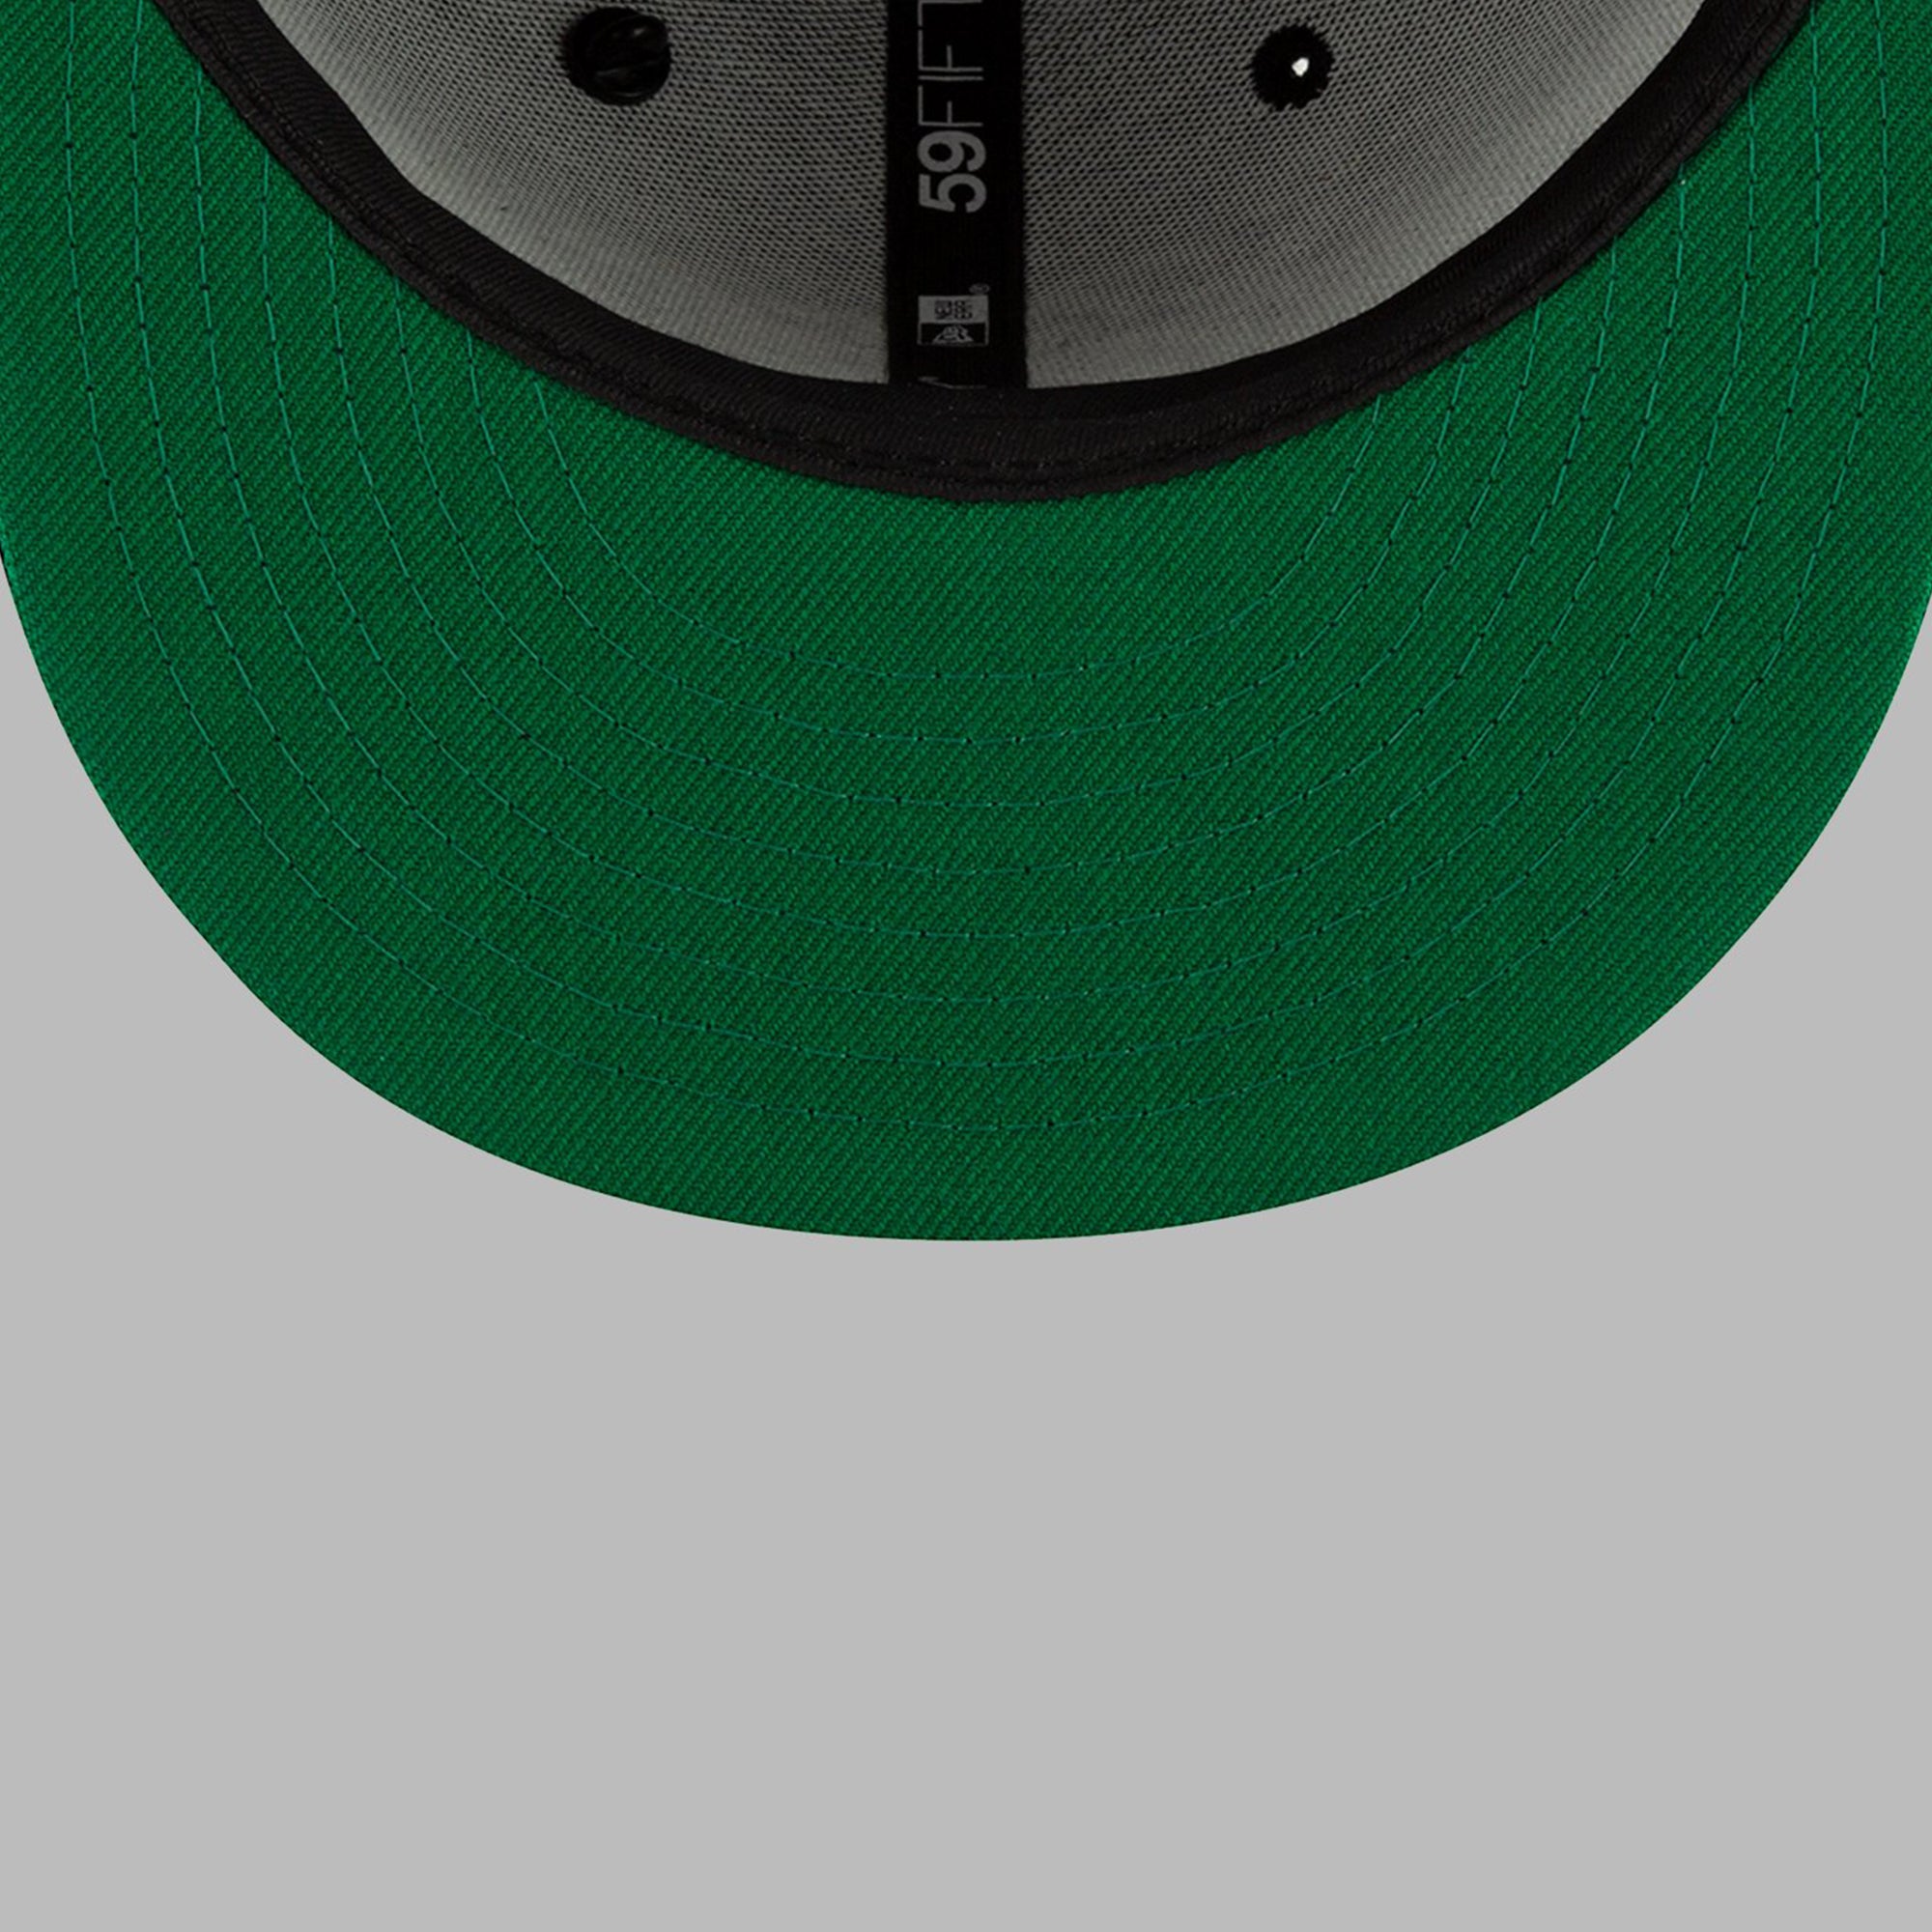 Paper Planes The Original Crown Fitted w/ Green Undervisor 'Black'